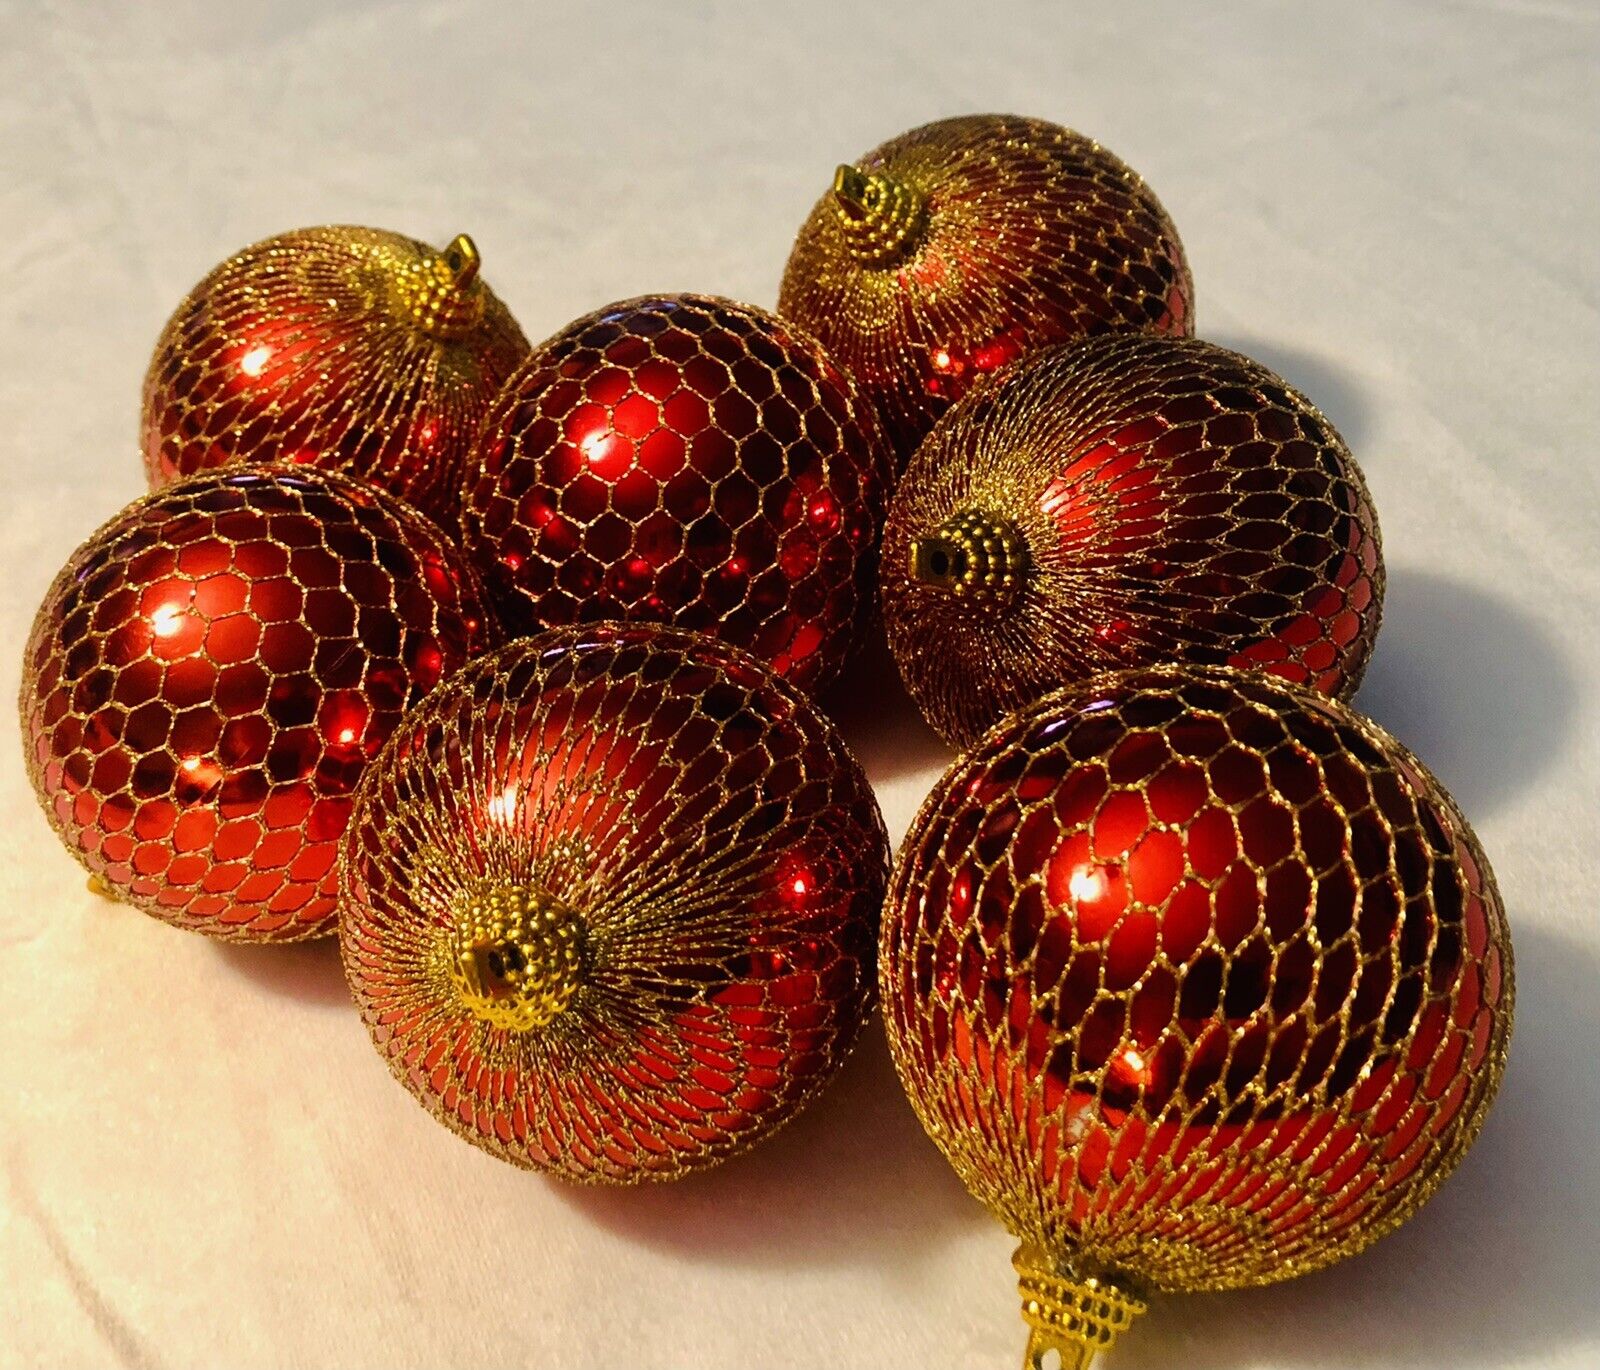 Lot of 8 Vintage Shiney Red Gold Mesh Wrapped Glass Ball Bulb Ornaments 